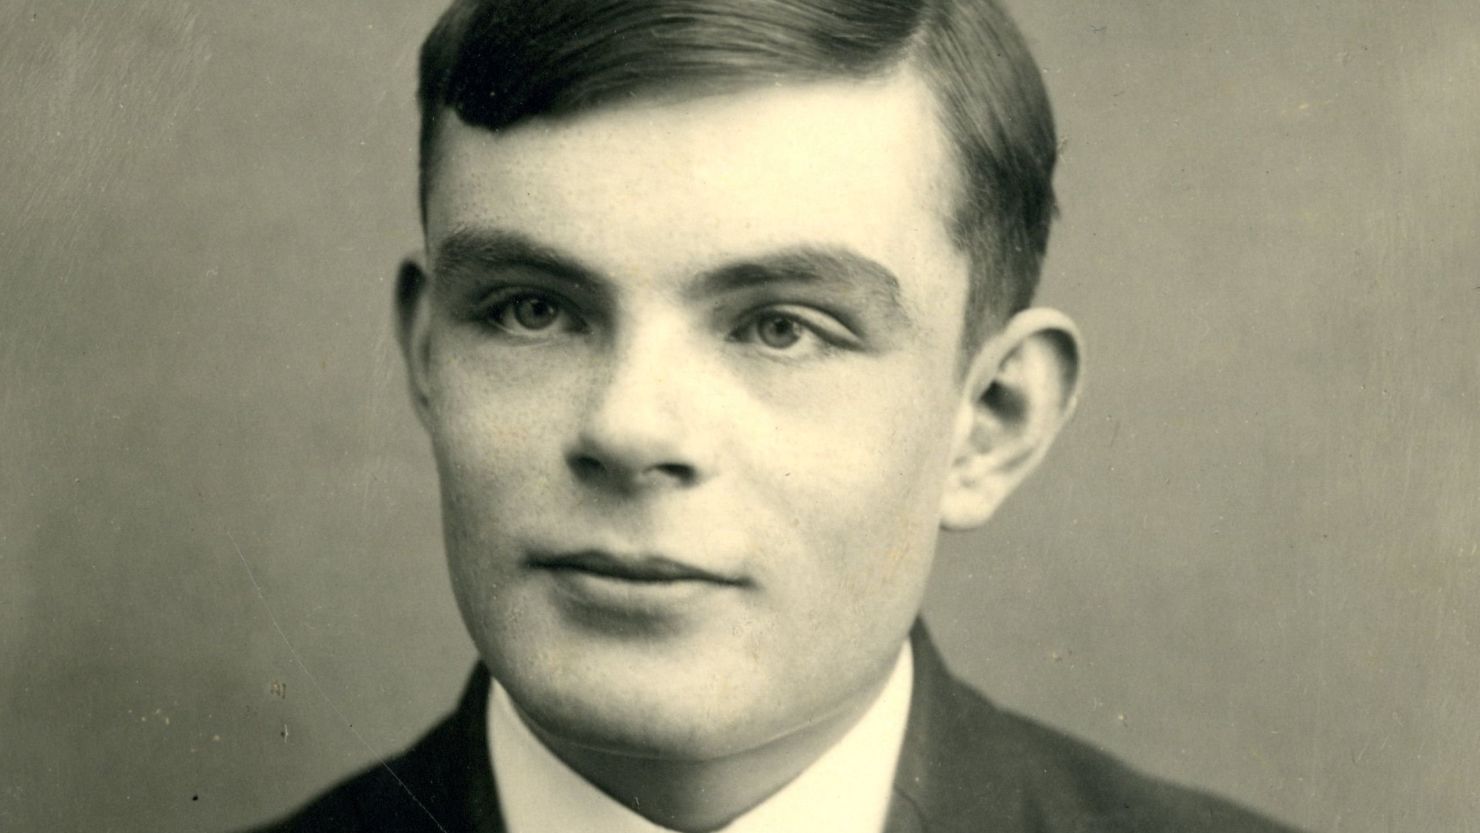 Alan Turing at Sherborne School in 1928, aged 16. His report cards from the time suggest he was far from a model pupil.